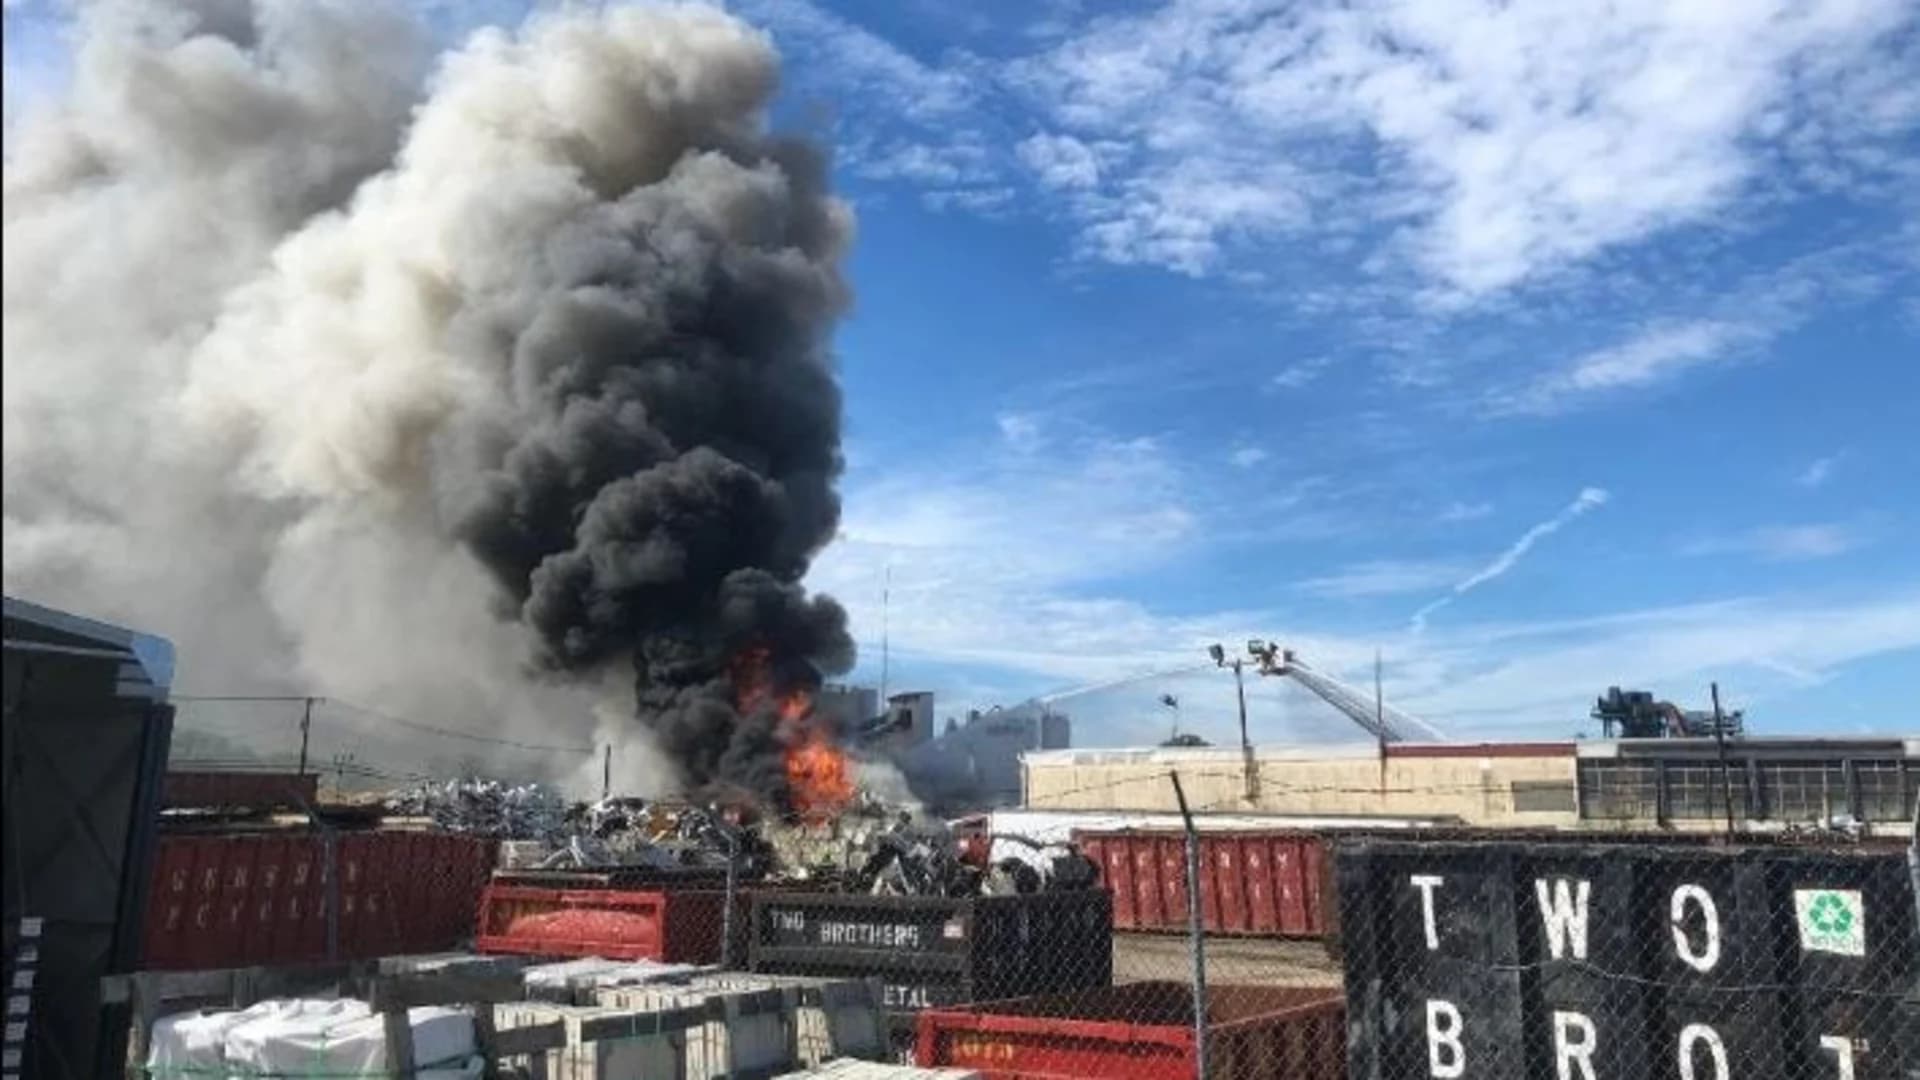 PHOTOS: Recycling center fire in West Babylon